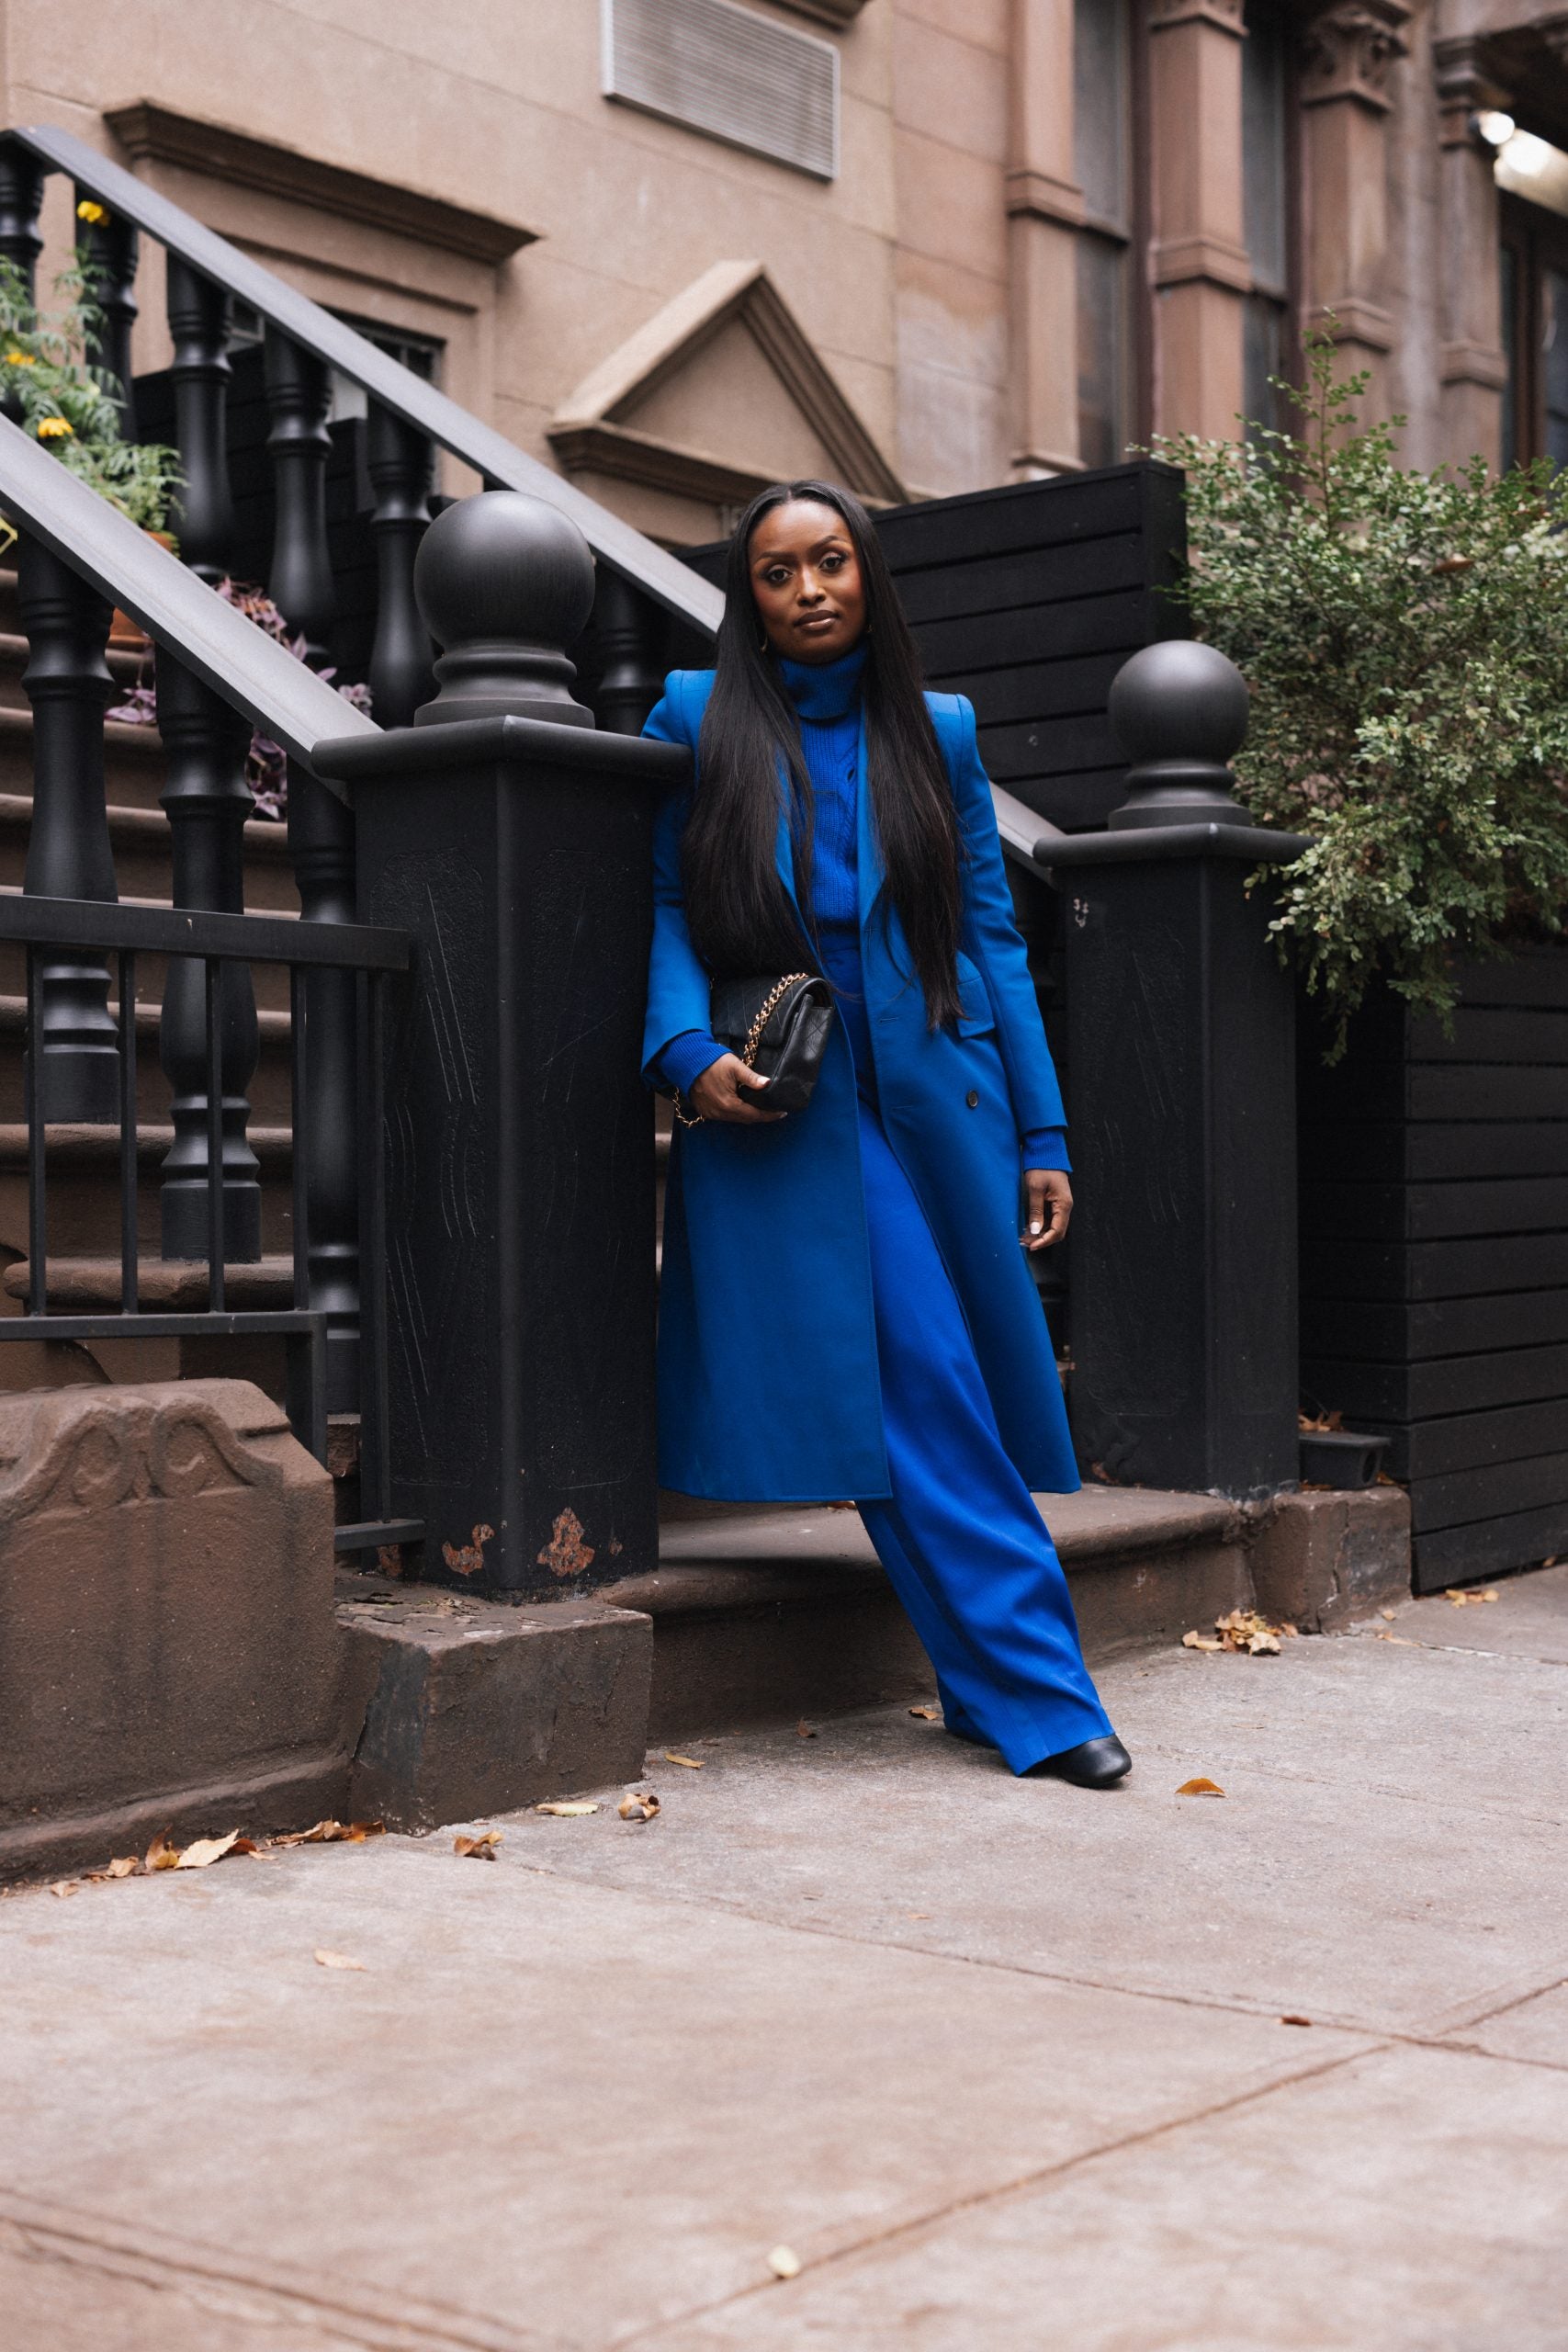 There are No Rules in Fashion According to Lifestyle Influencer, Tenicka Boyd